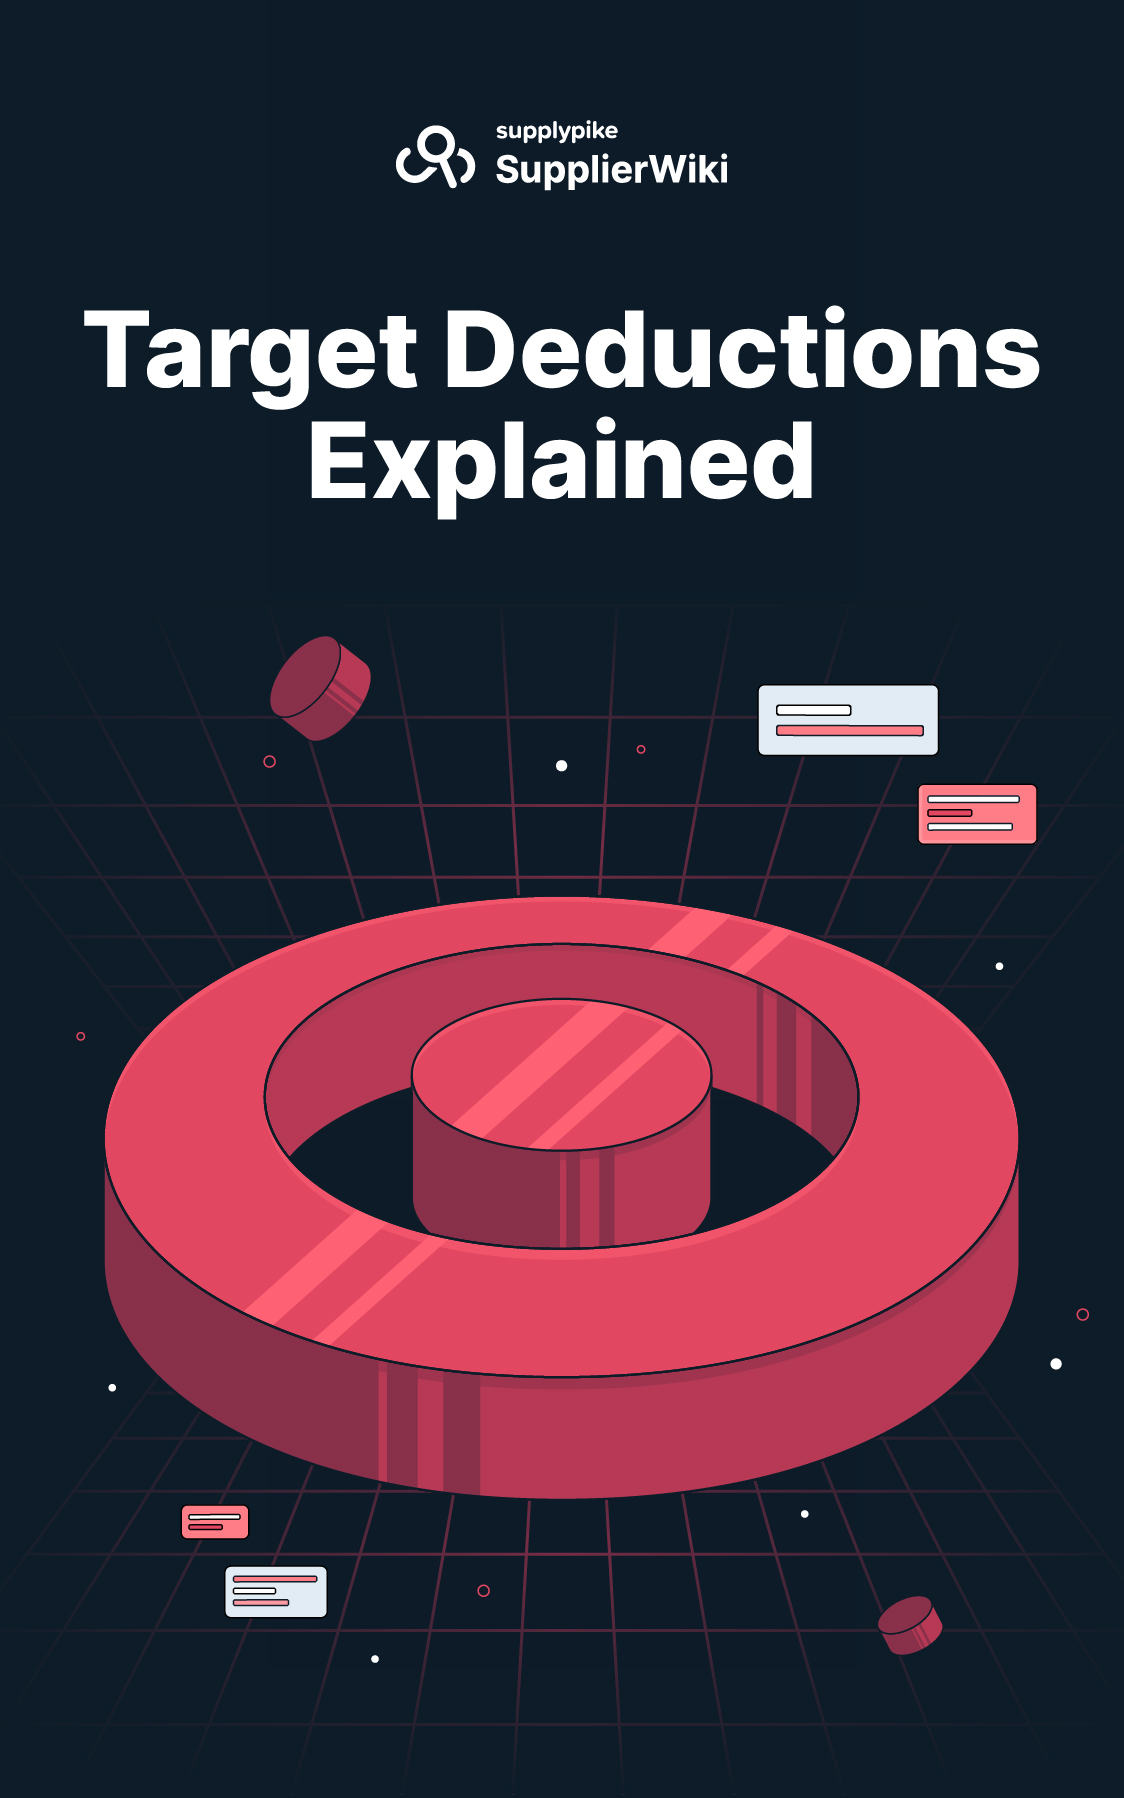 Target Deductions Explained